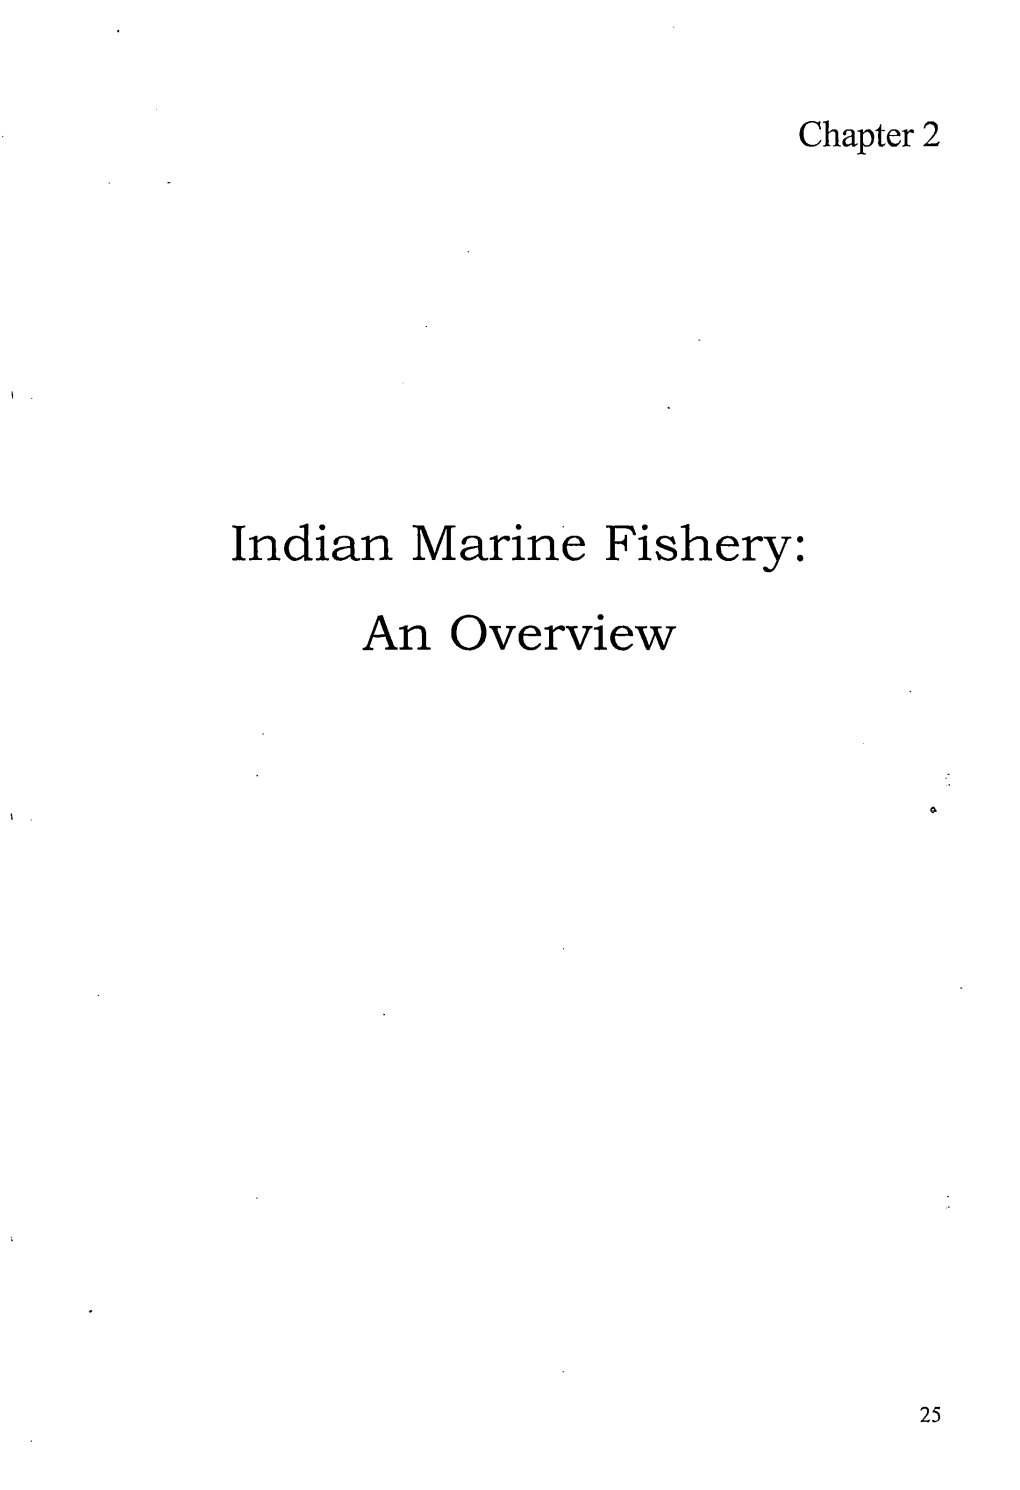 Indian Marine Fishery: an Overview